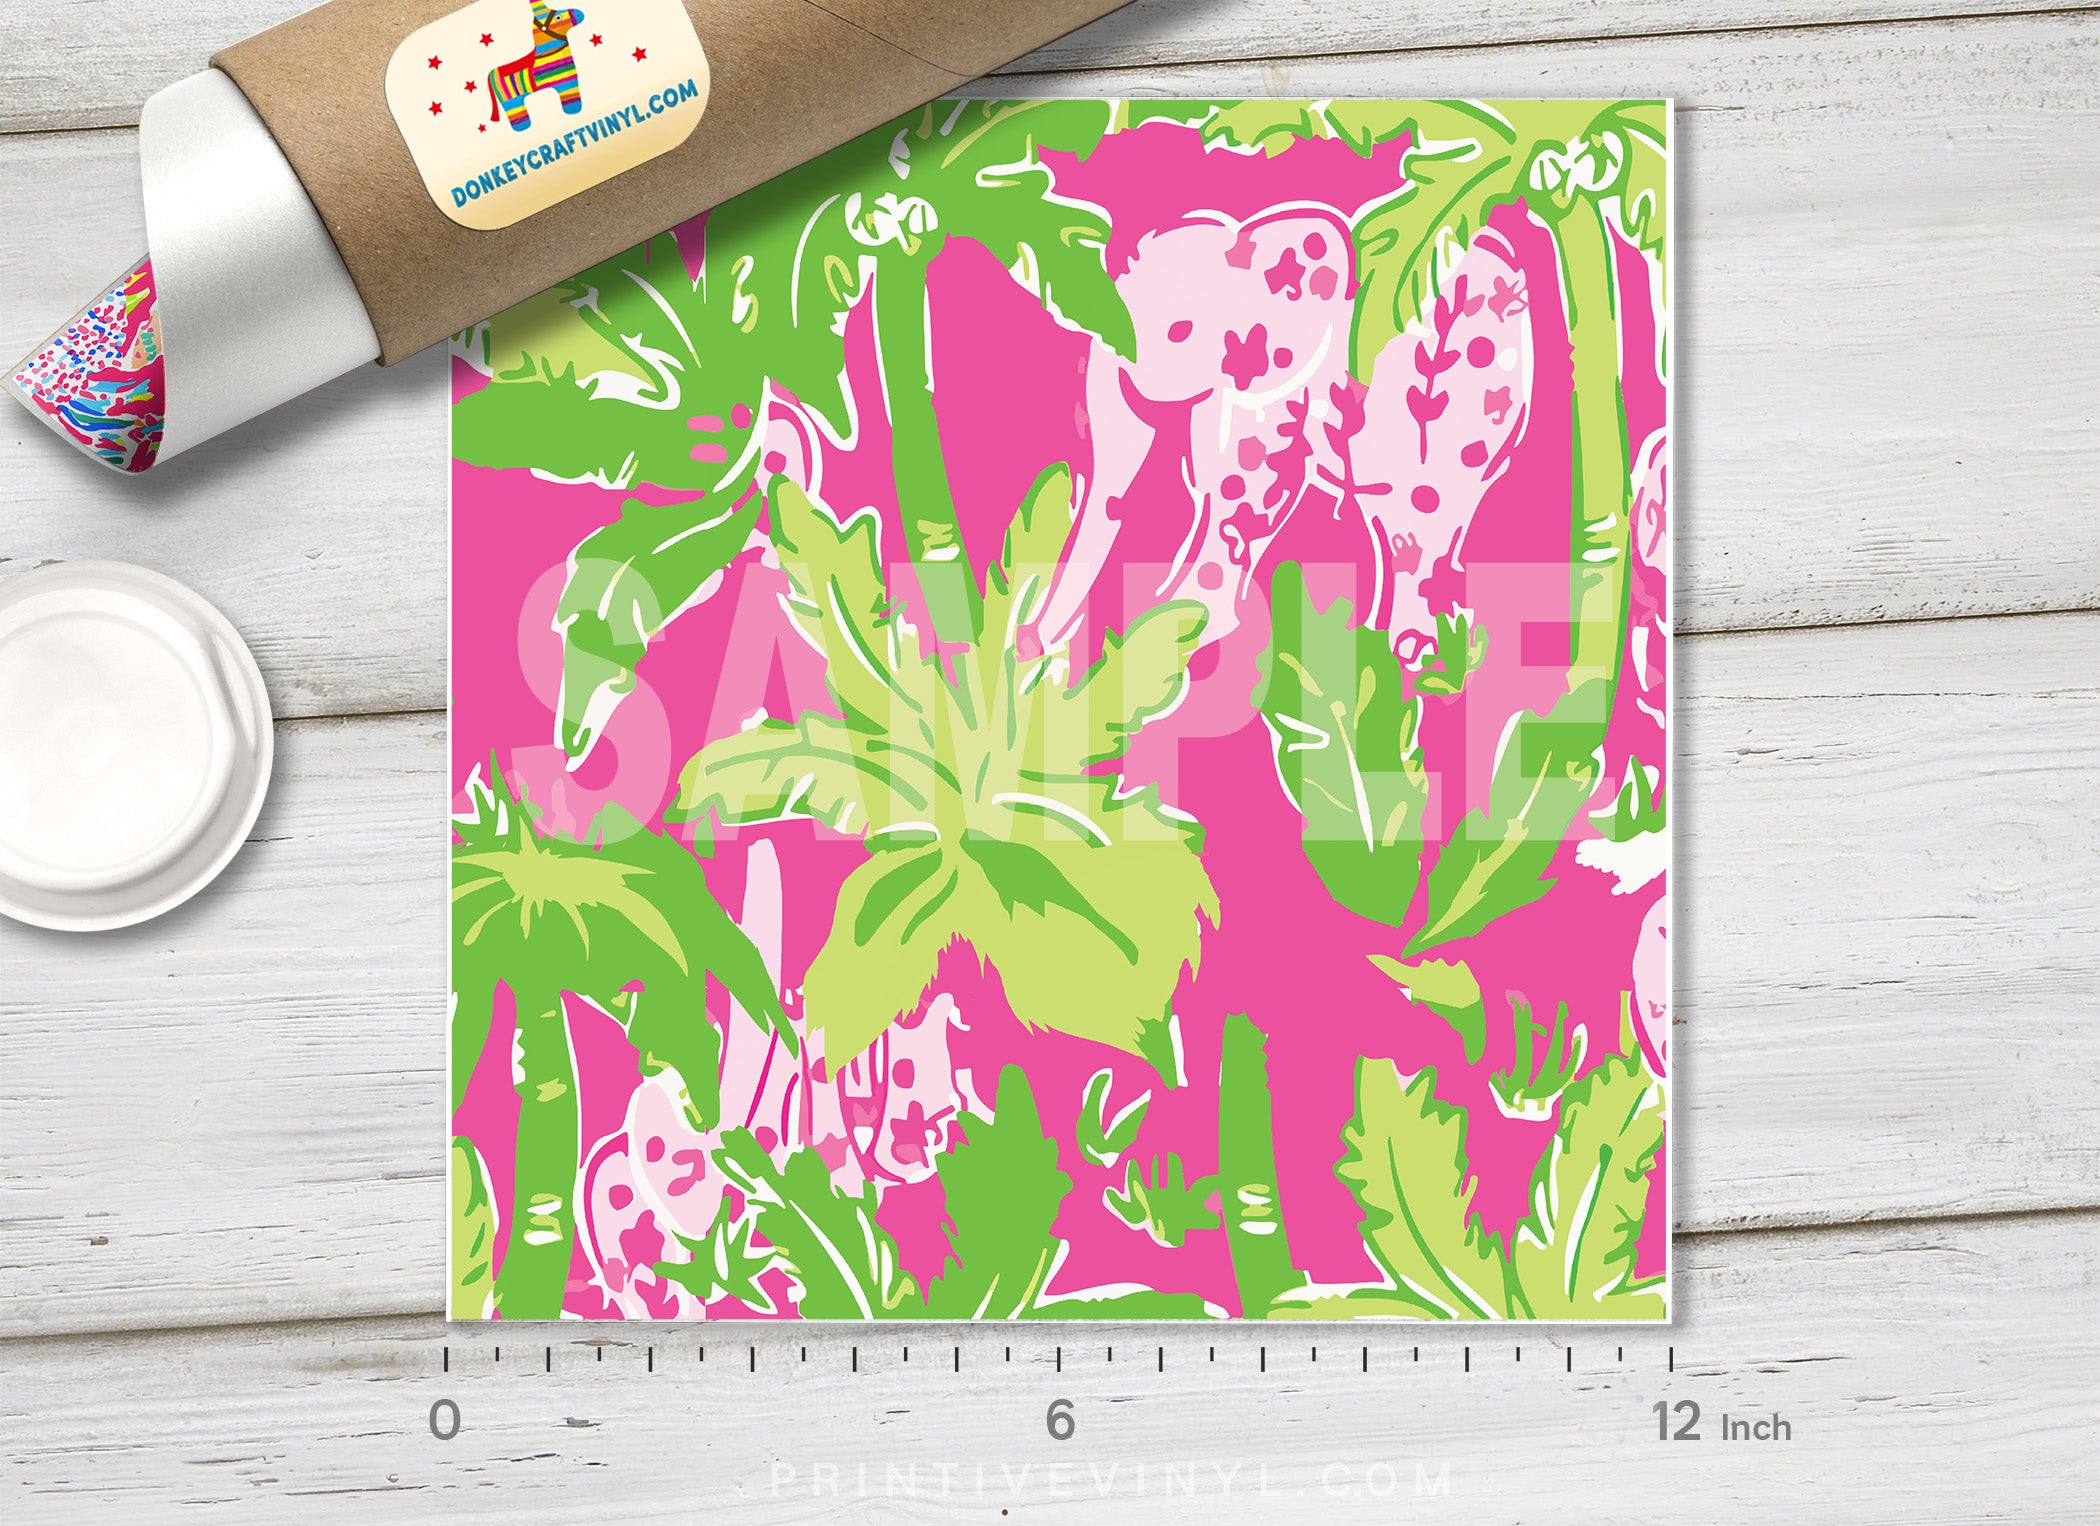 Lilly Inspired Pink Elephants Pattern Adhesive Vinyl L019